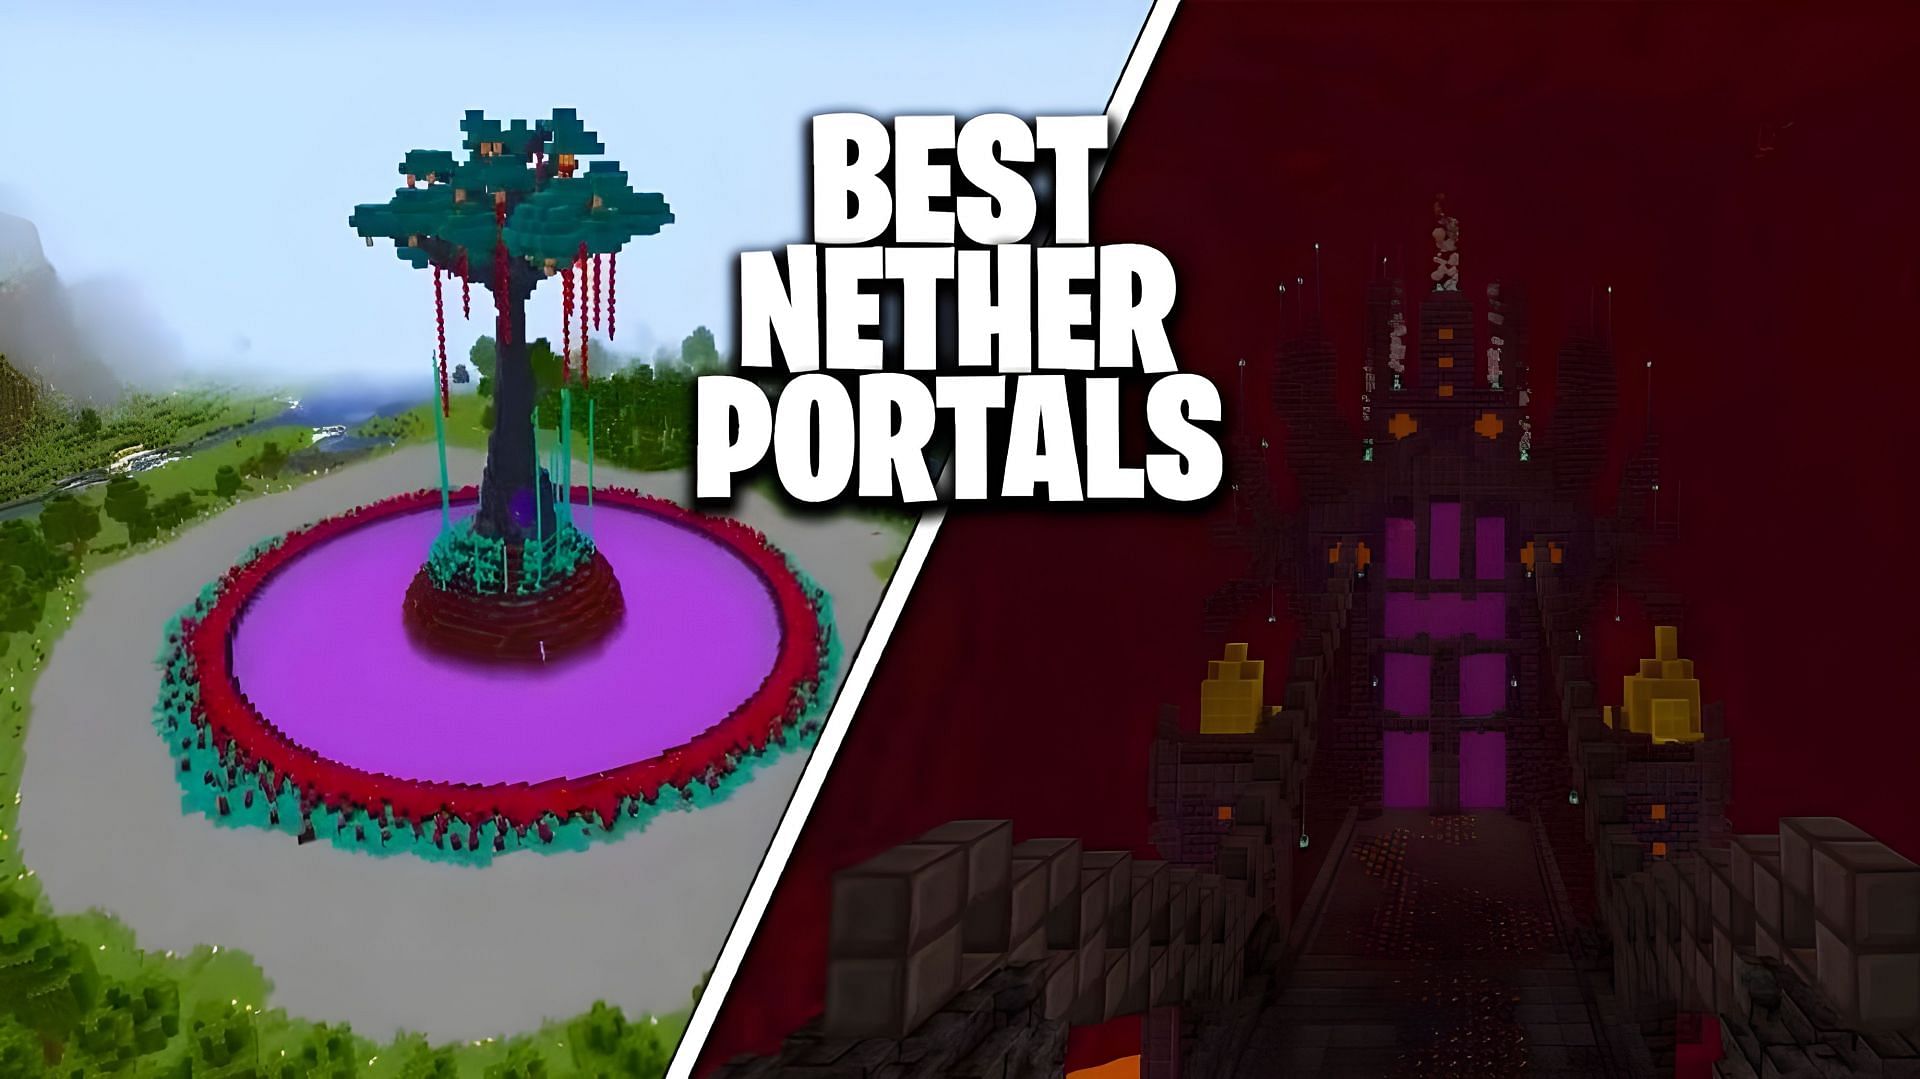 Nether portals can be made in truly cool ways in Minecraft (Image via Youtube/MinecraftHUB)